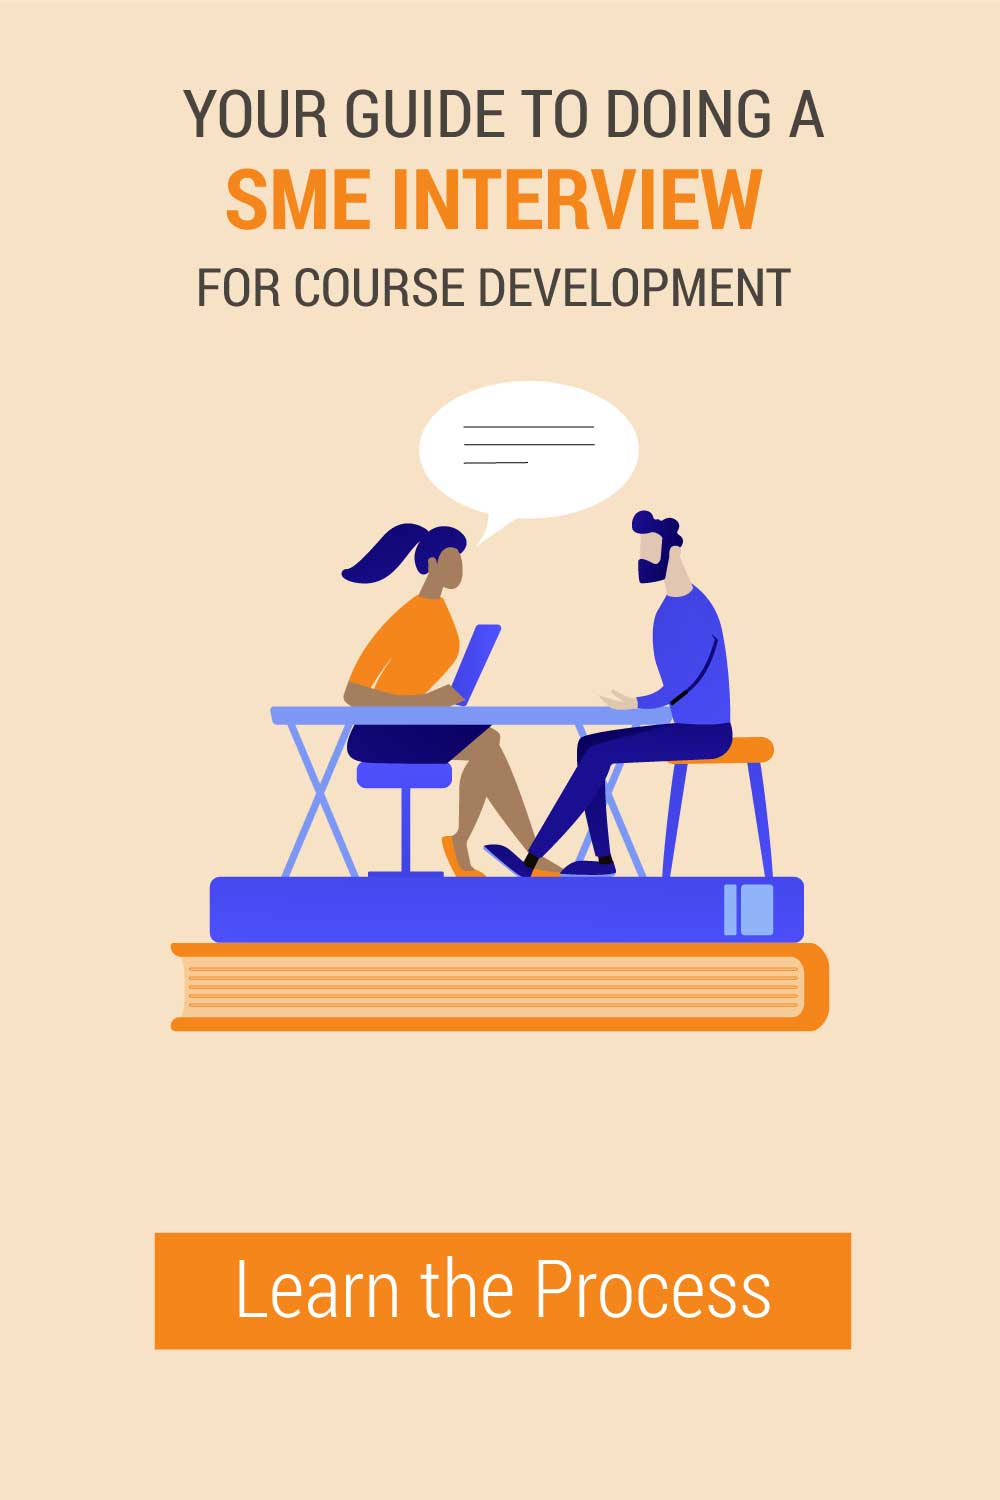 Your Guide To Doing A SME Interview For Course Development